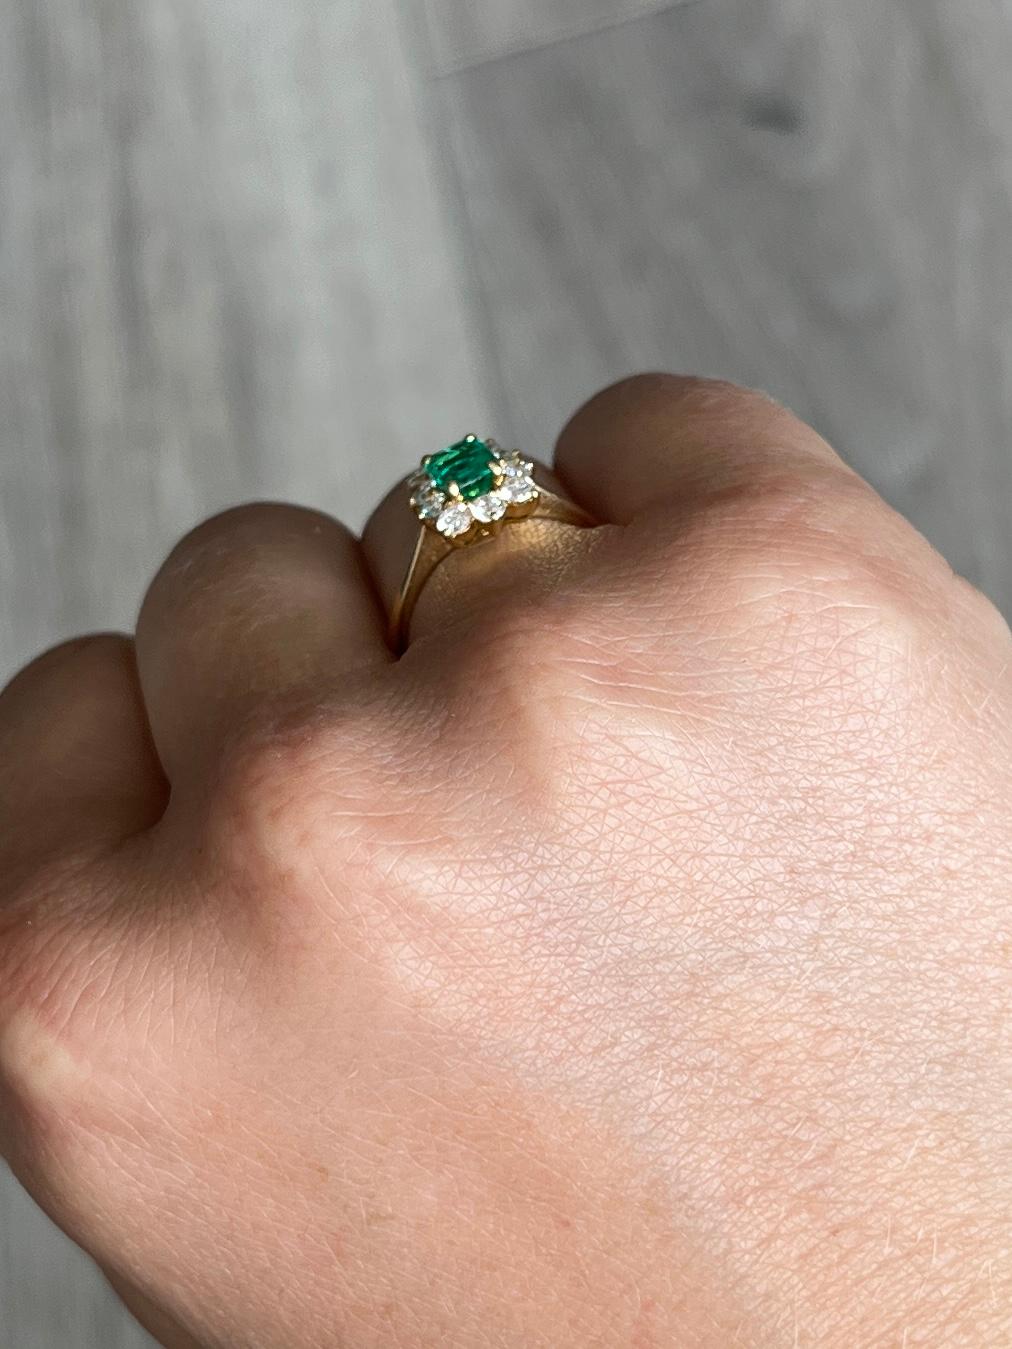 This stunning cluster boasts a 20pt emerald at the centre of it. Surrounding the beautiful green stone are diamonds totalling 50pts. All modelled in 18carat gold.

Ring Size: M or 6 1/4   
Cluster Dimensions: 10x8mm

Weight: 3.2g